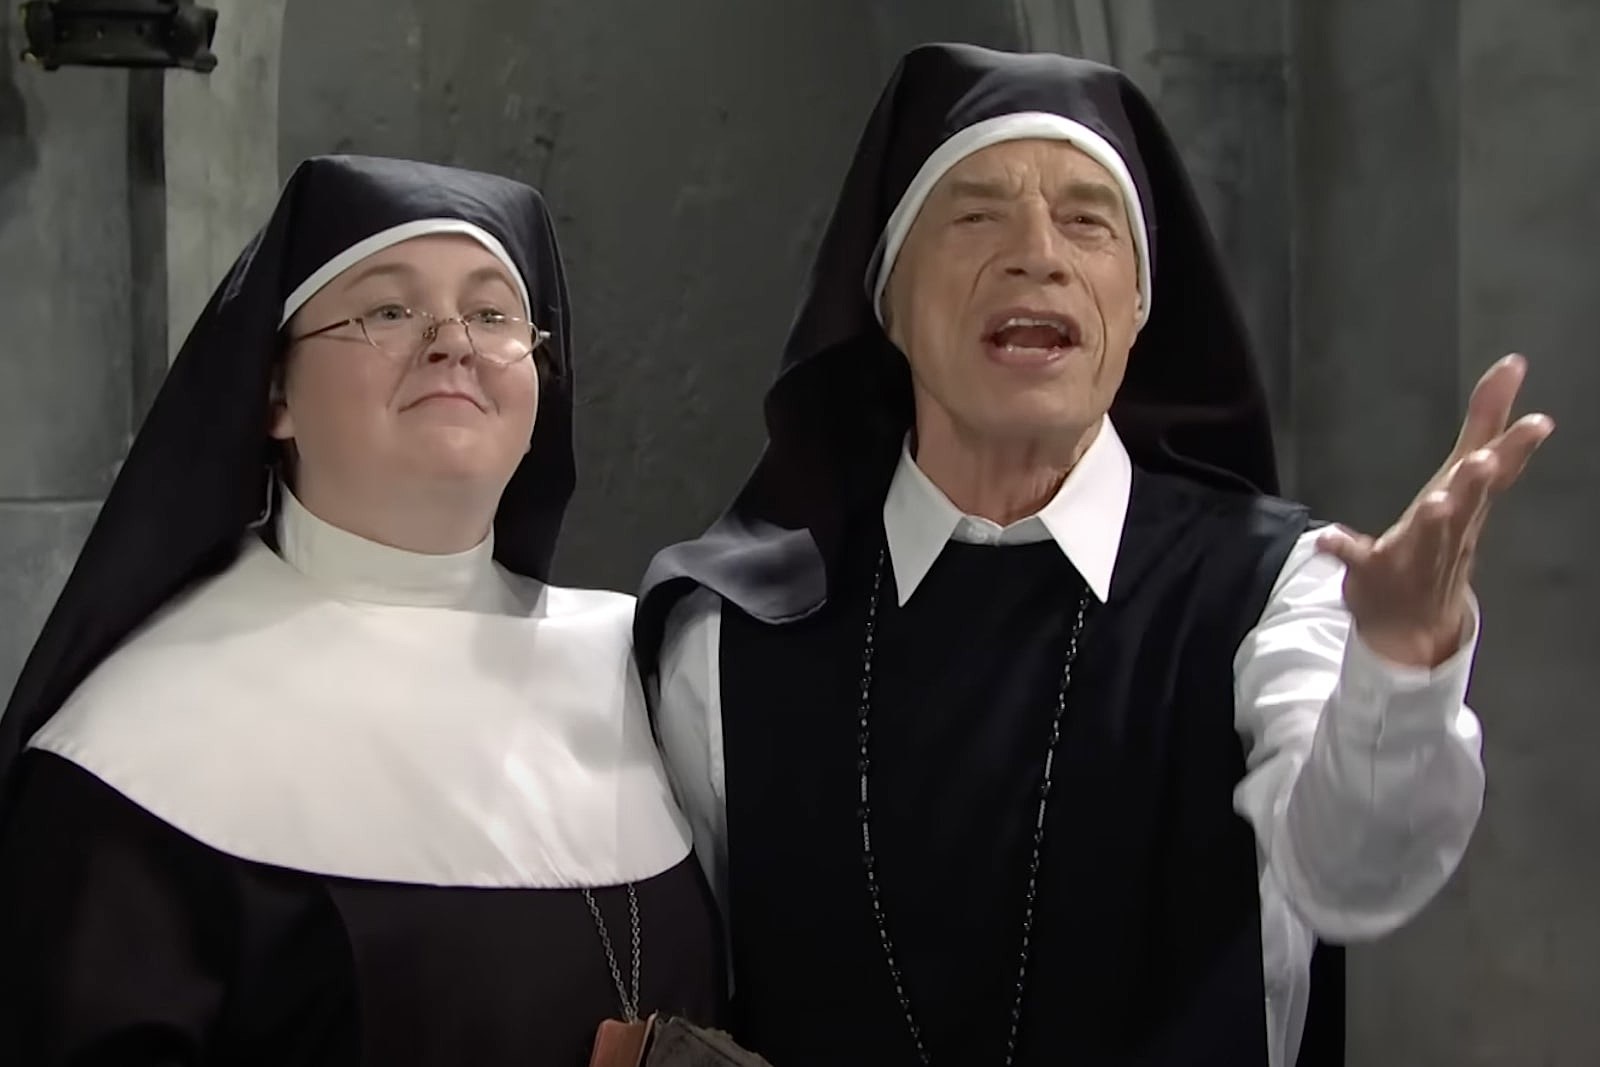 Watch Mick Jagger Make Surprise 'Saturday Night Live' Appearance